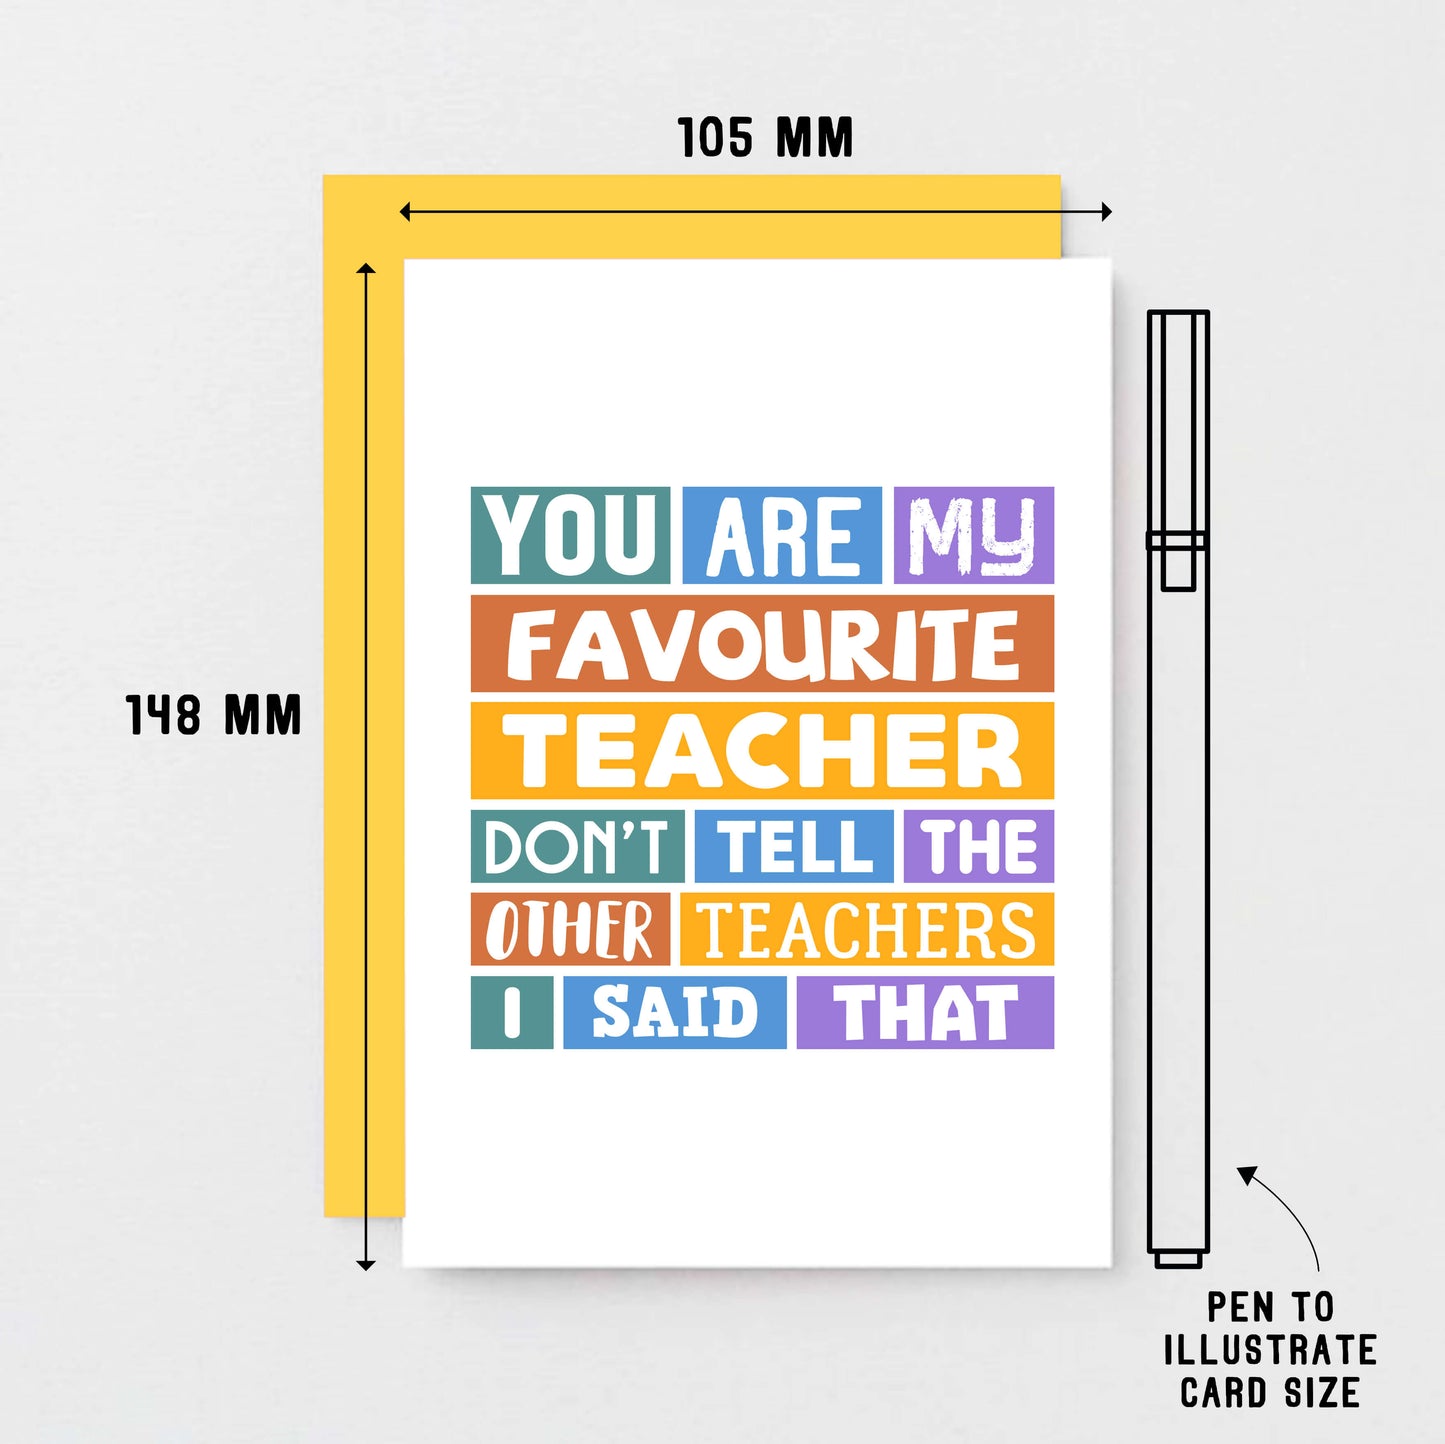 Favourite Teacher Card by SixElevenCreations. Reads You are my favourite teacher. Don't tell the other teachers I said that. Product Code SE0028A6